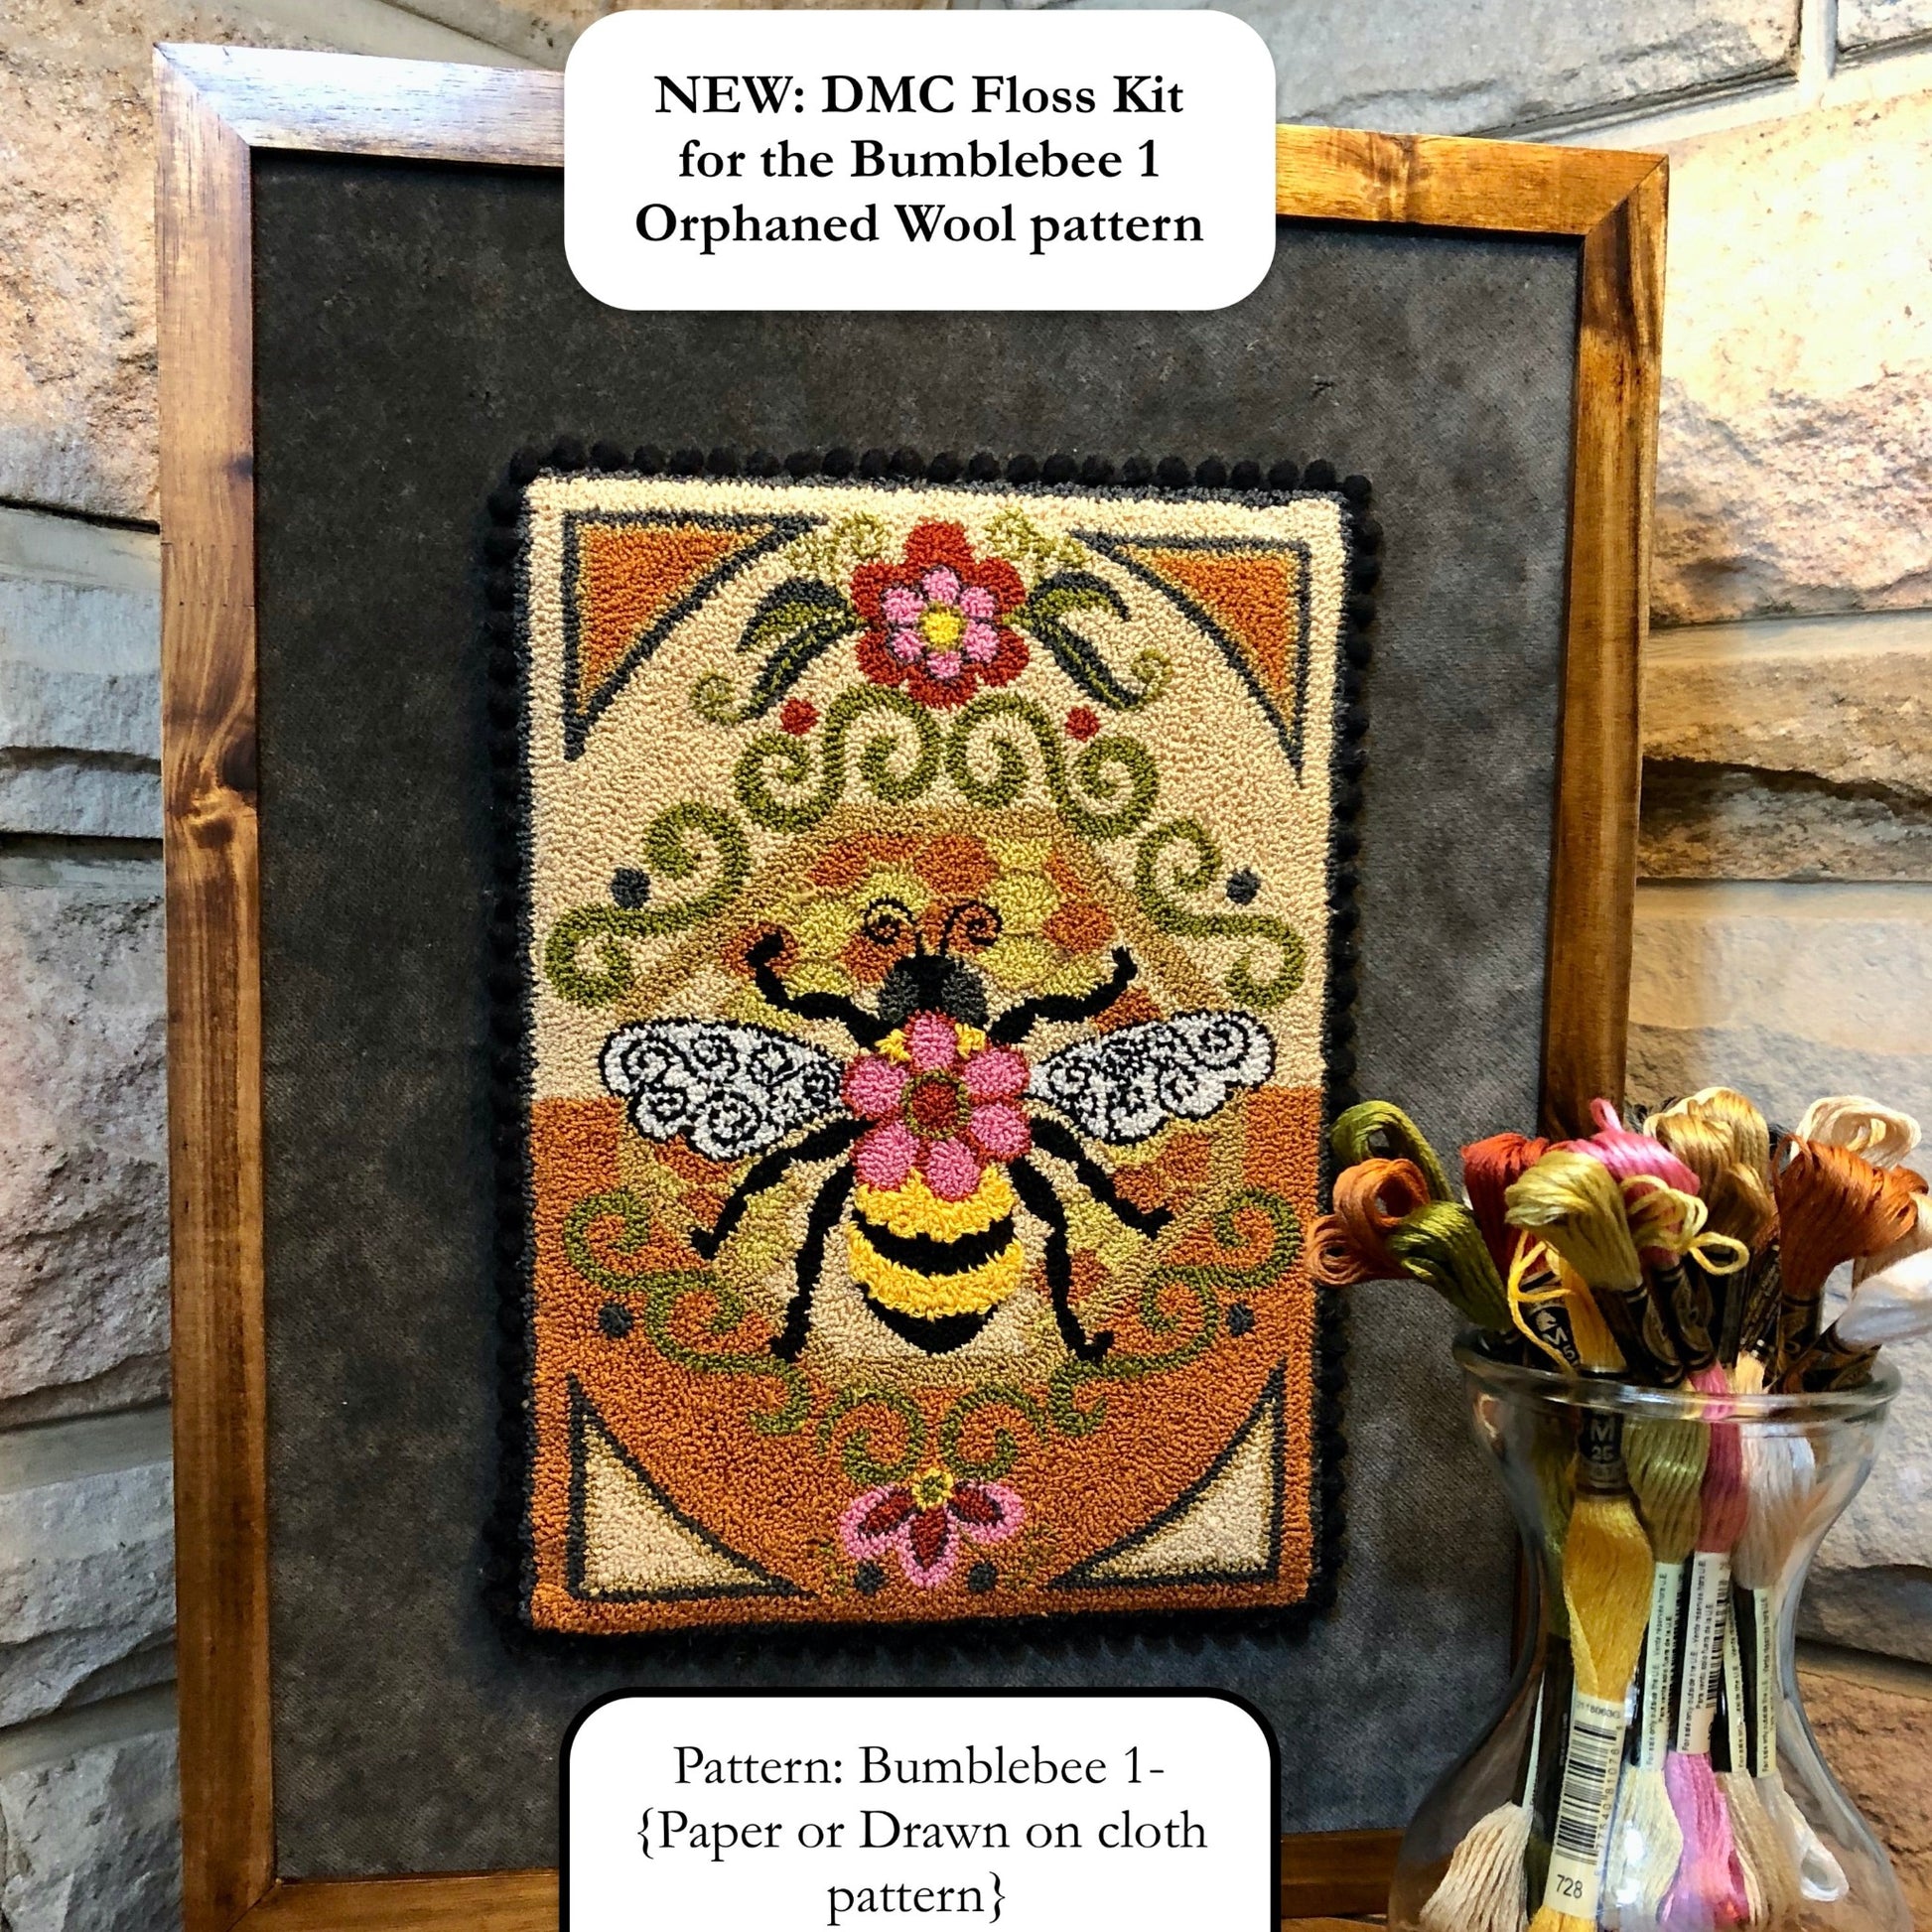 Bumblebee I - Punch Needle PDF Digital Download Pattern, by Orphaned Wool